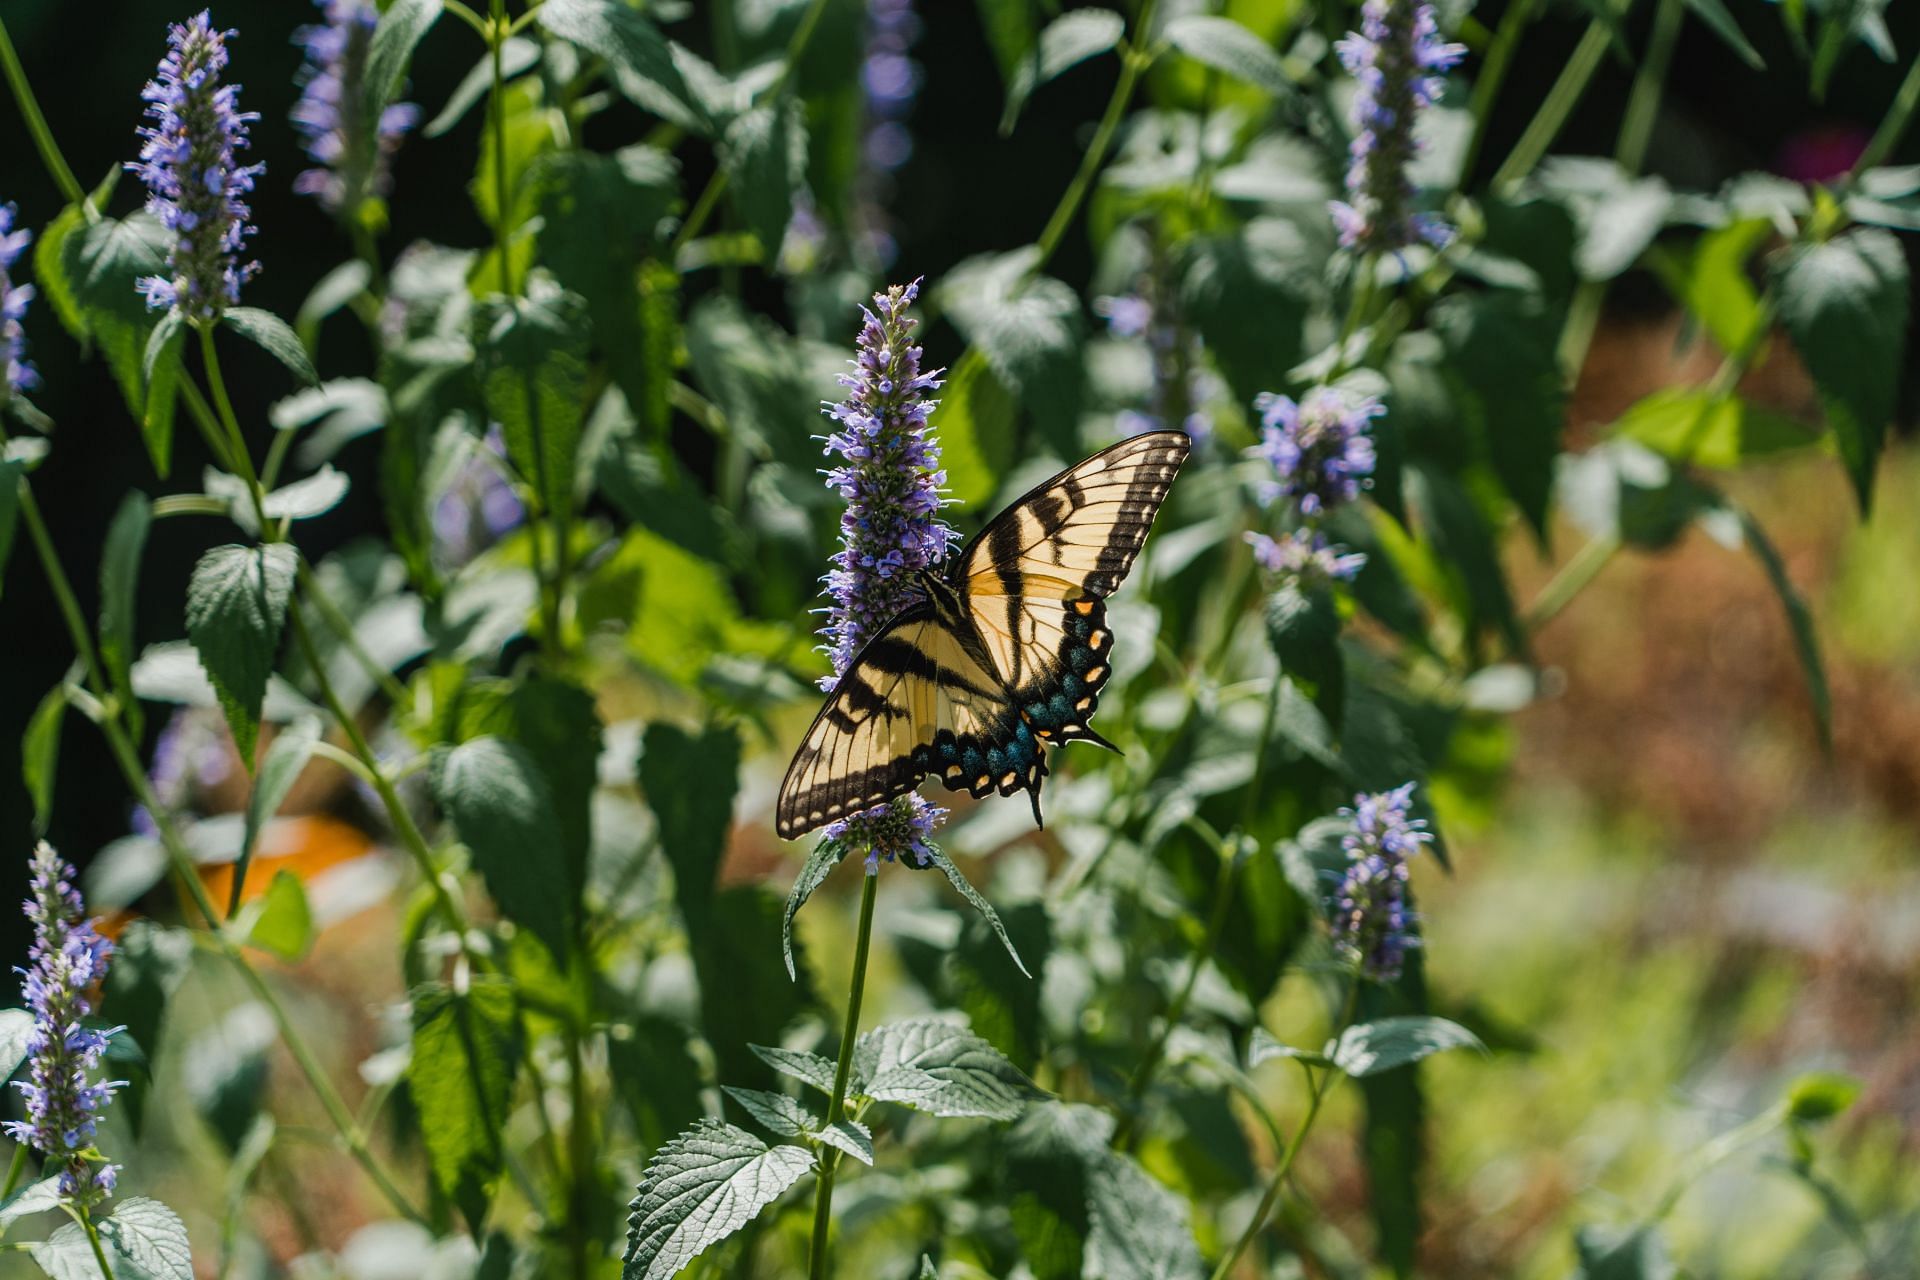 More research is needed to learn about hyssop health benefits. (Image via Unsplash/Jeffrey Hamilton)